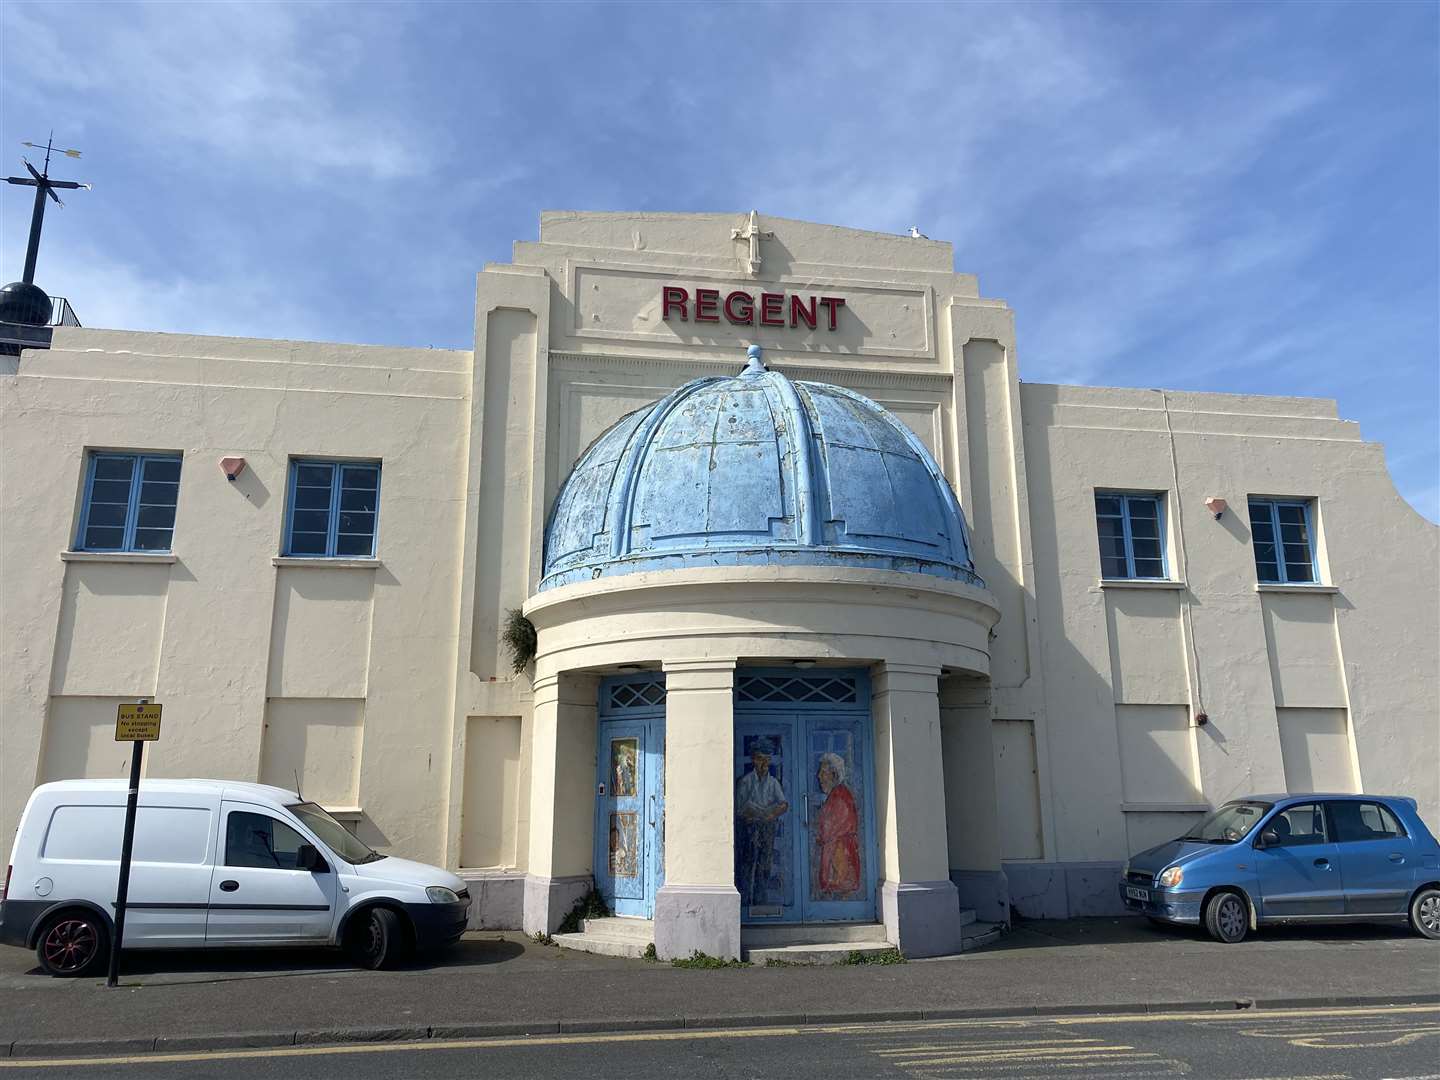 The Regent in Deal has been empty for many years, despite calls for its re-use